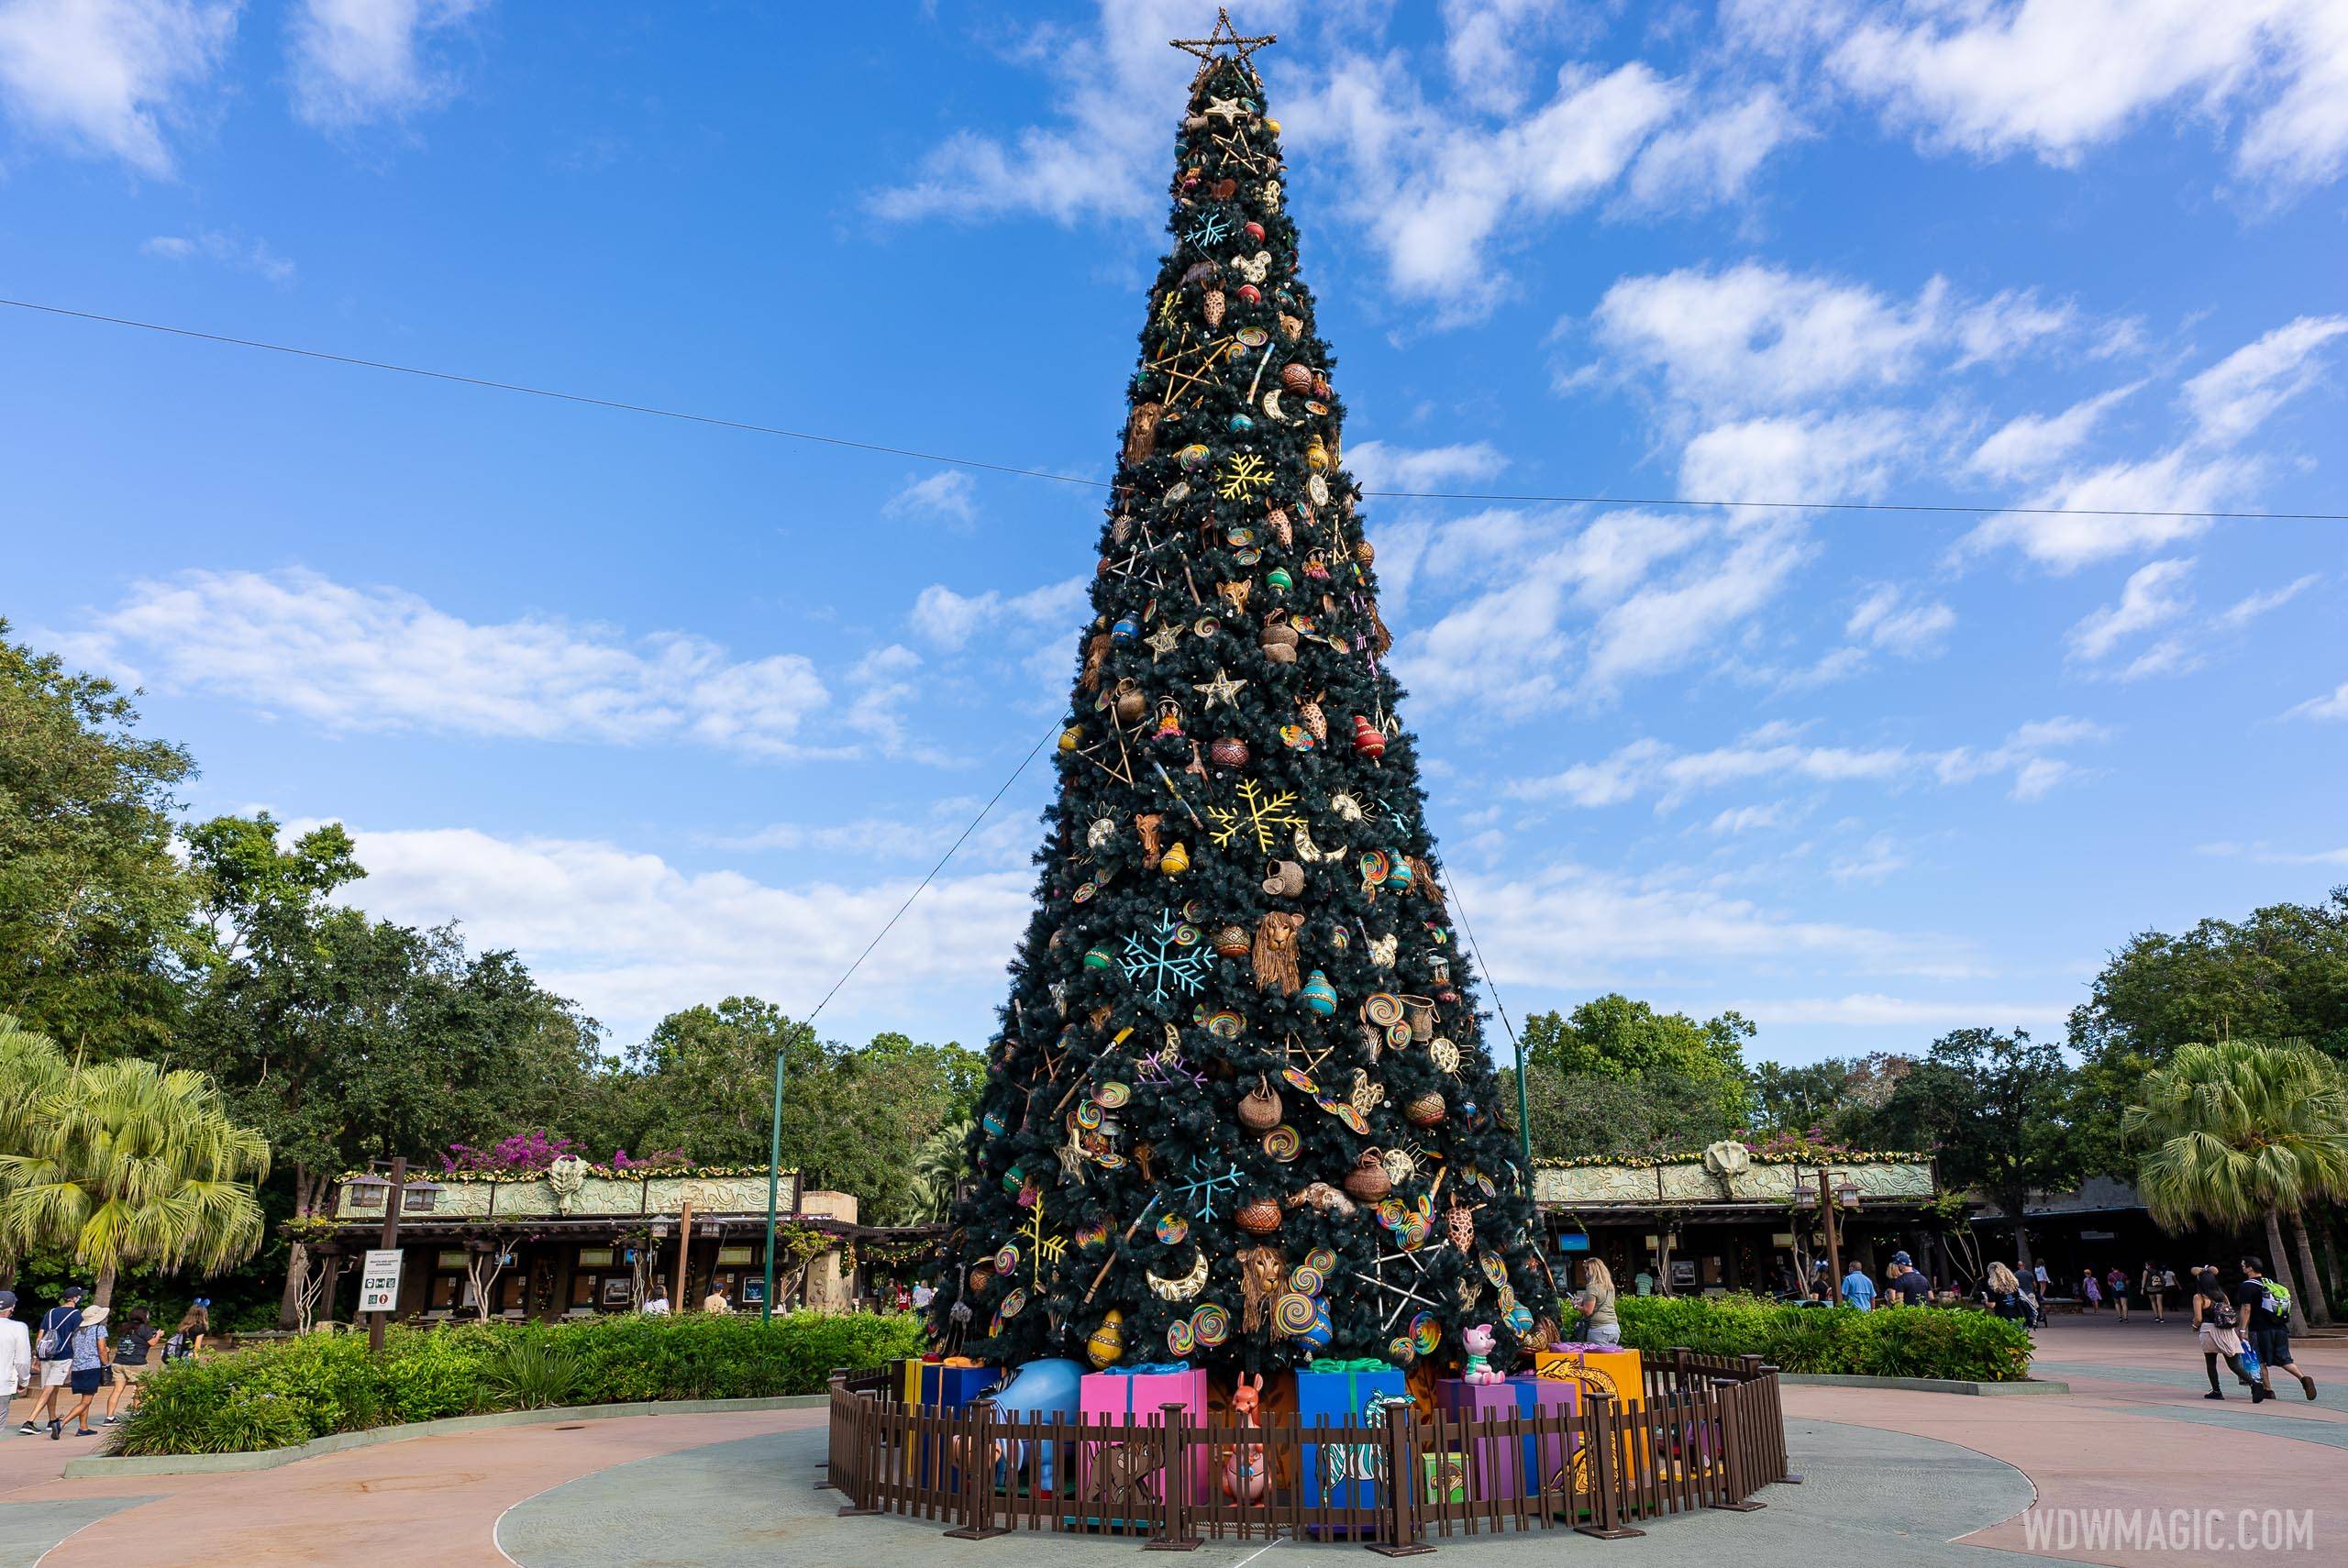 PHOTOS - Disney's Animal Kingdom is now decorated for the holidays